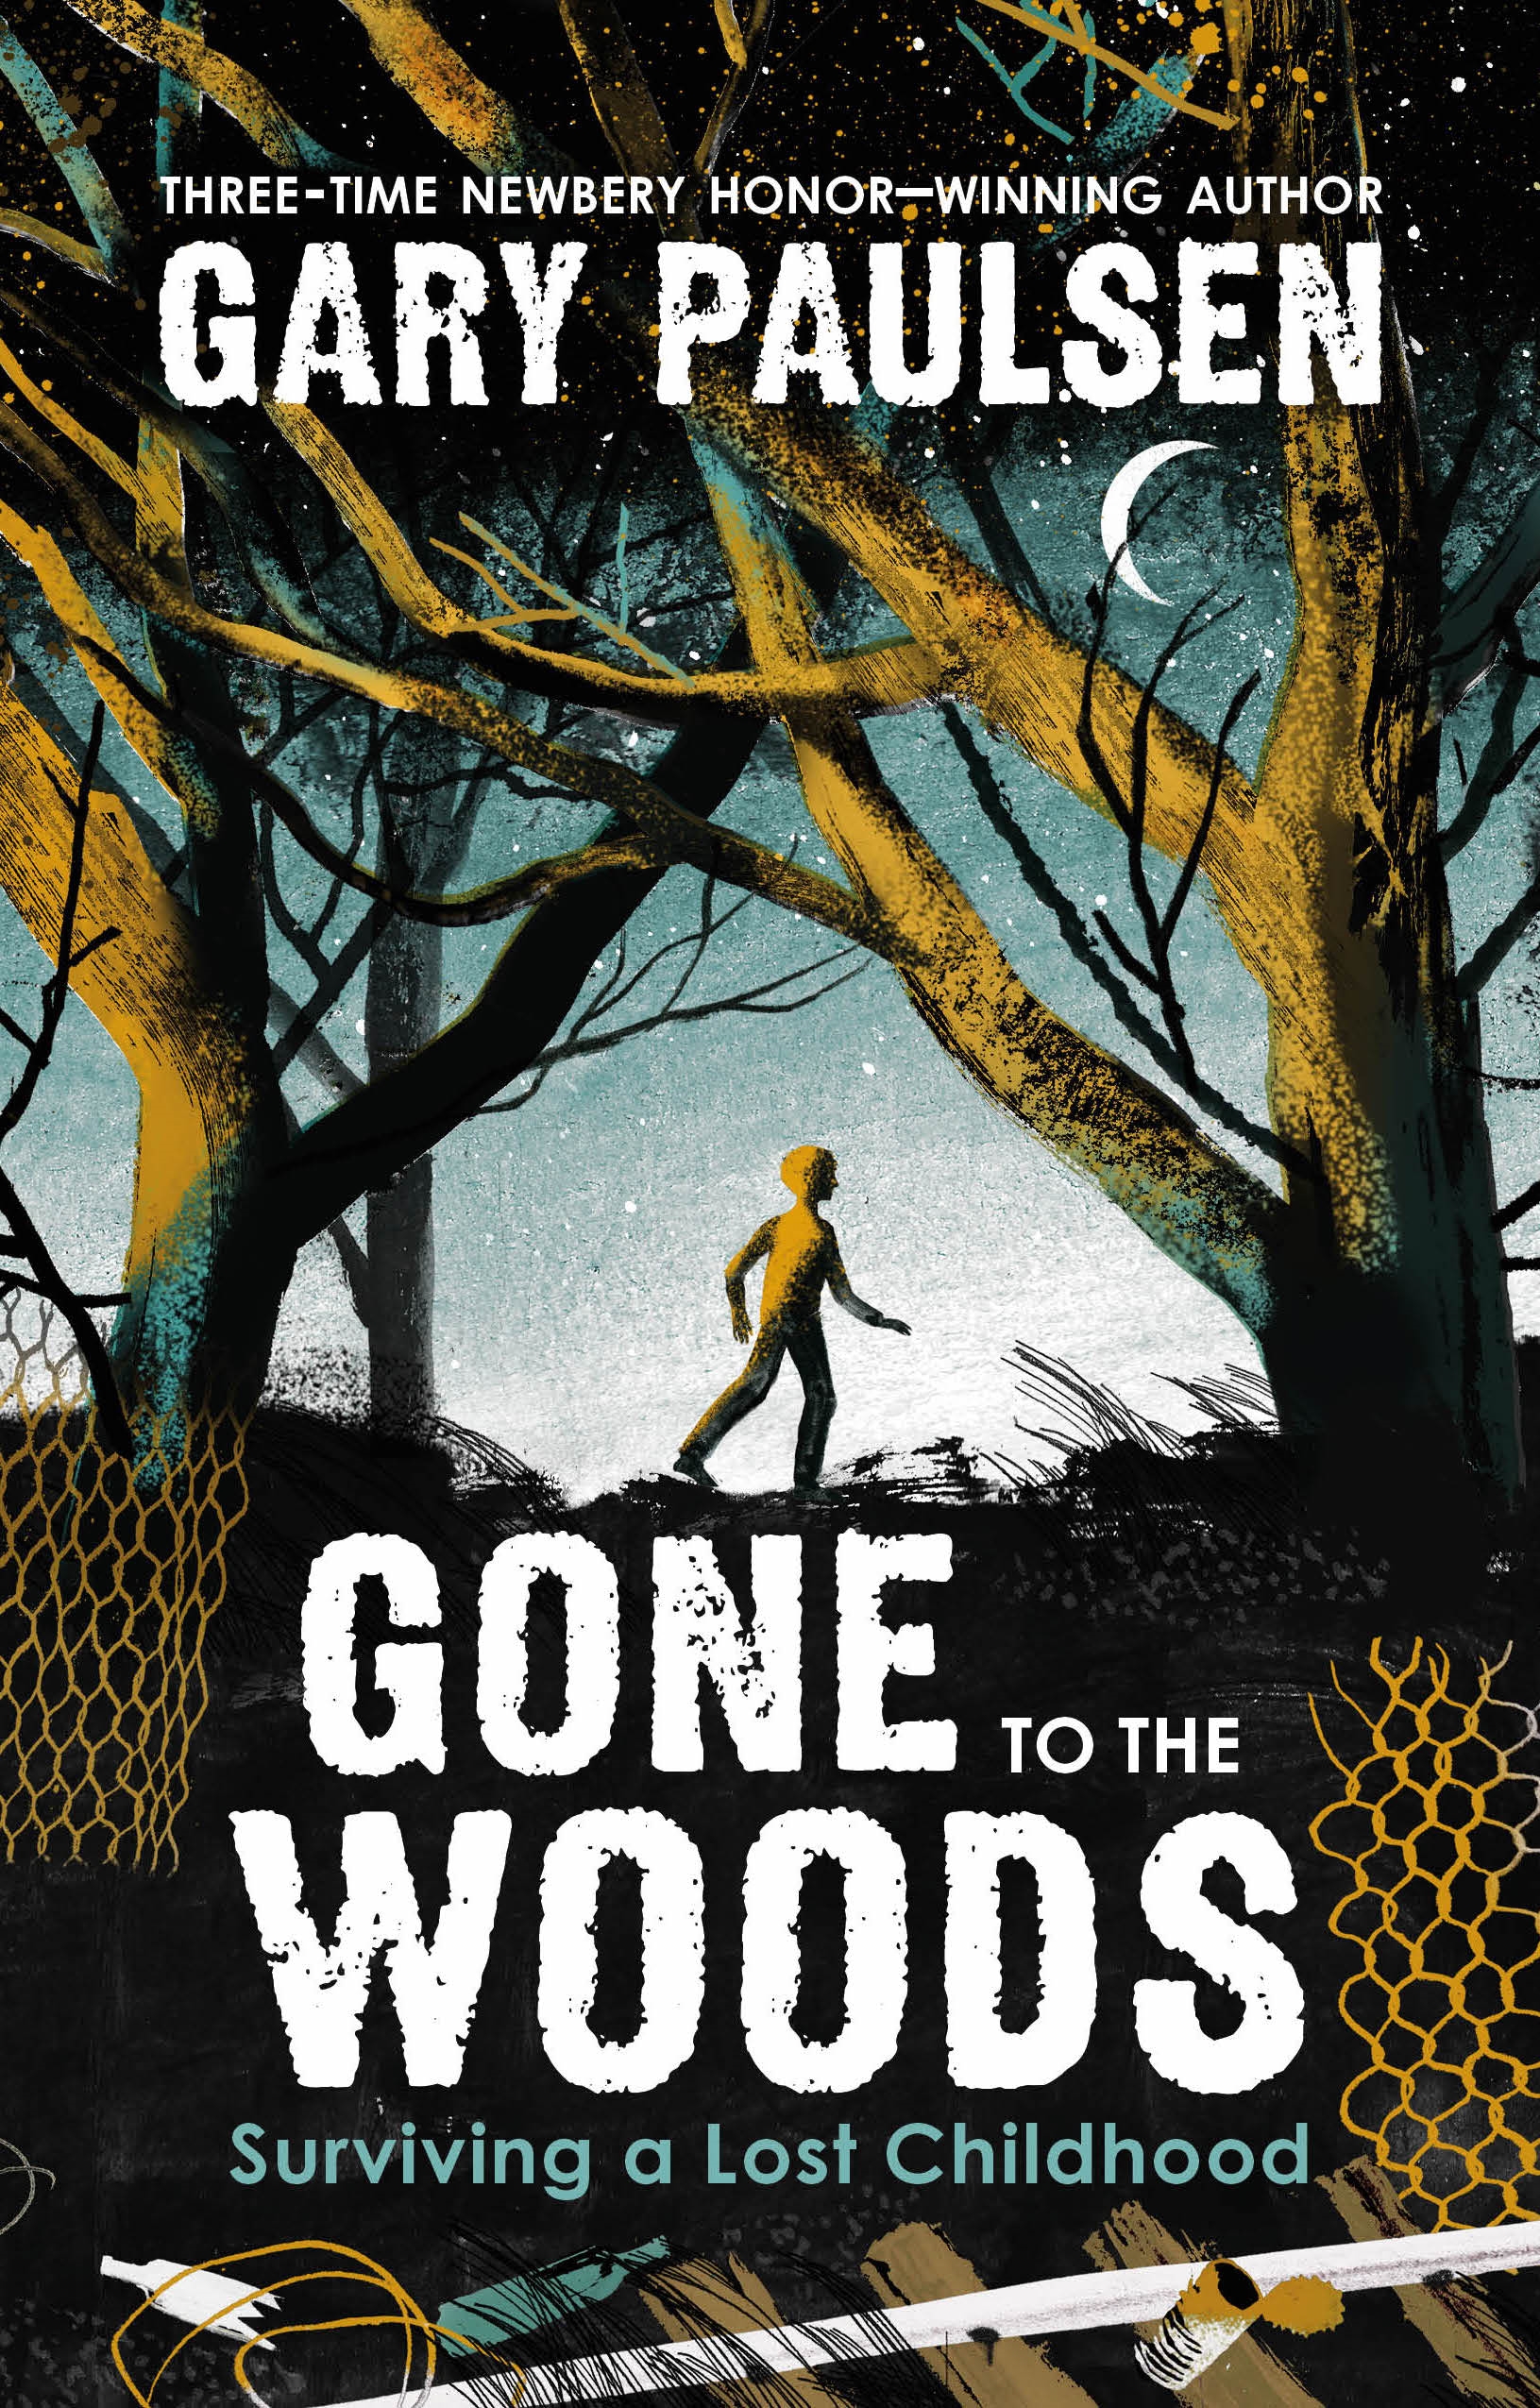 Book “Gone to the Woods” by Gary Paulsen — January 12, 2021